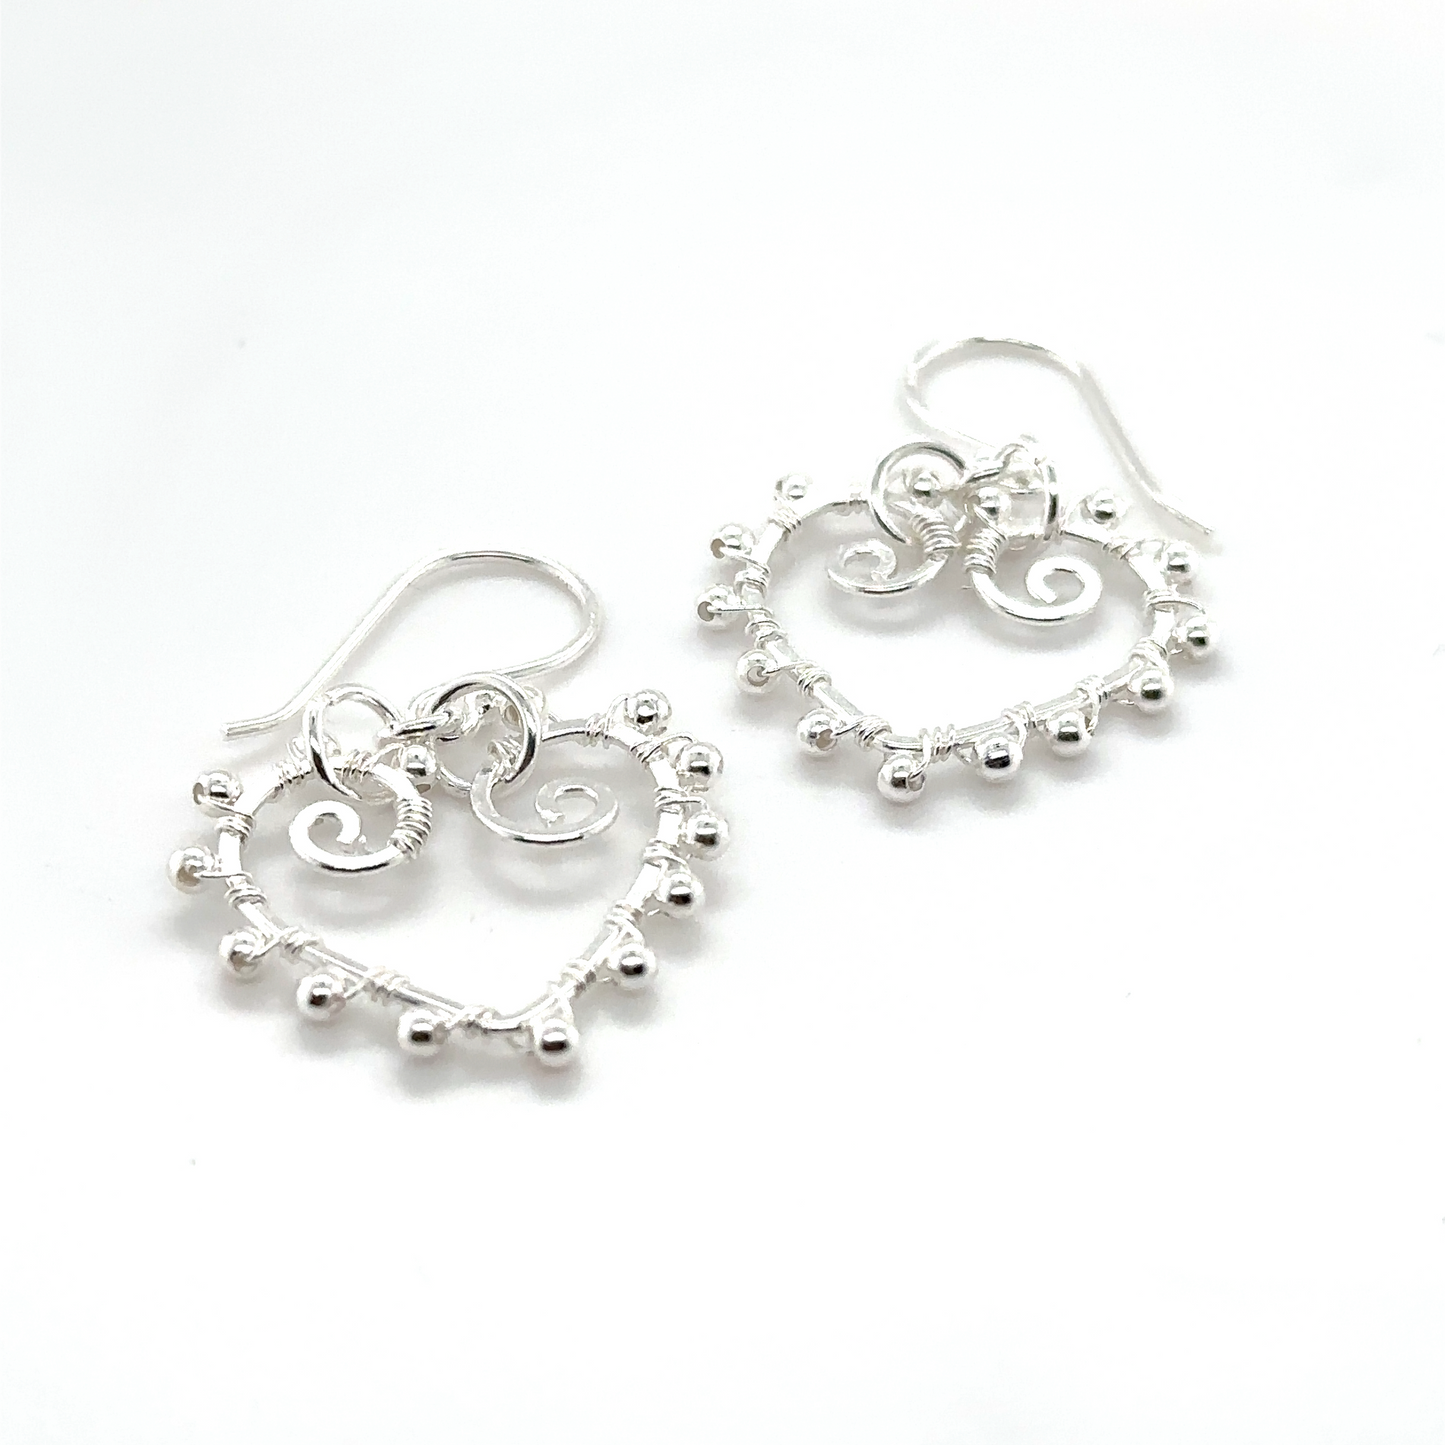 A pair of lightweight Heart Earrings With Silver Beads by Super Silver, perfect for everyday wear, showcased against a white background.